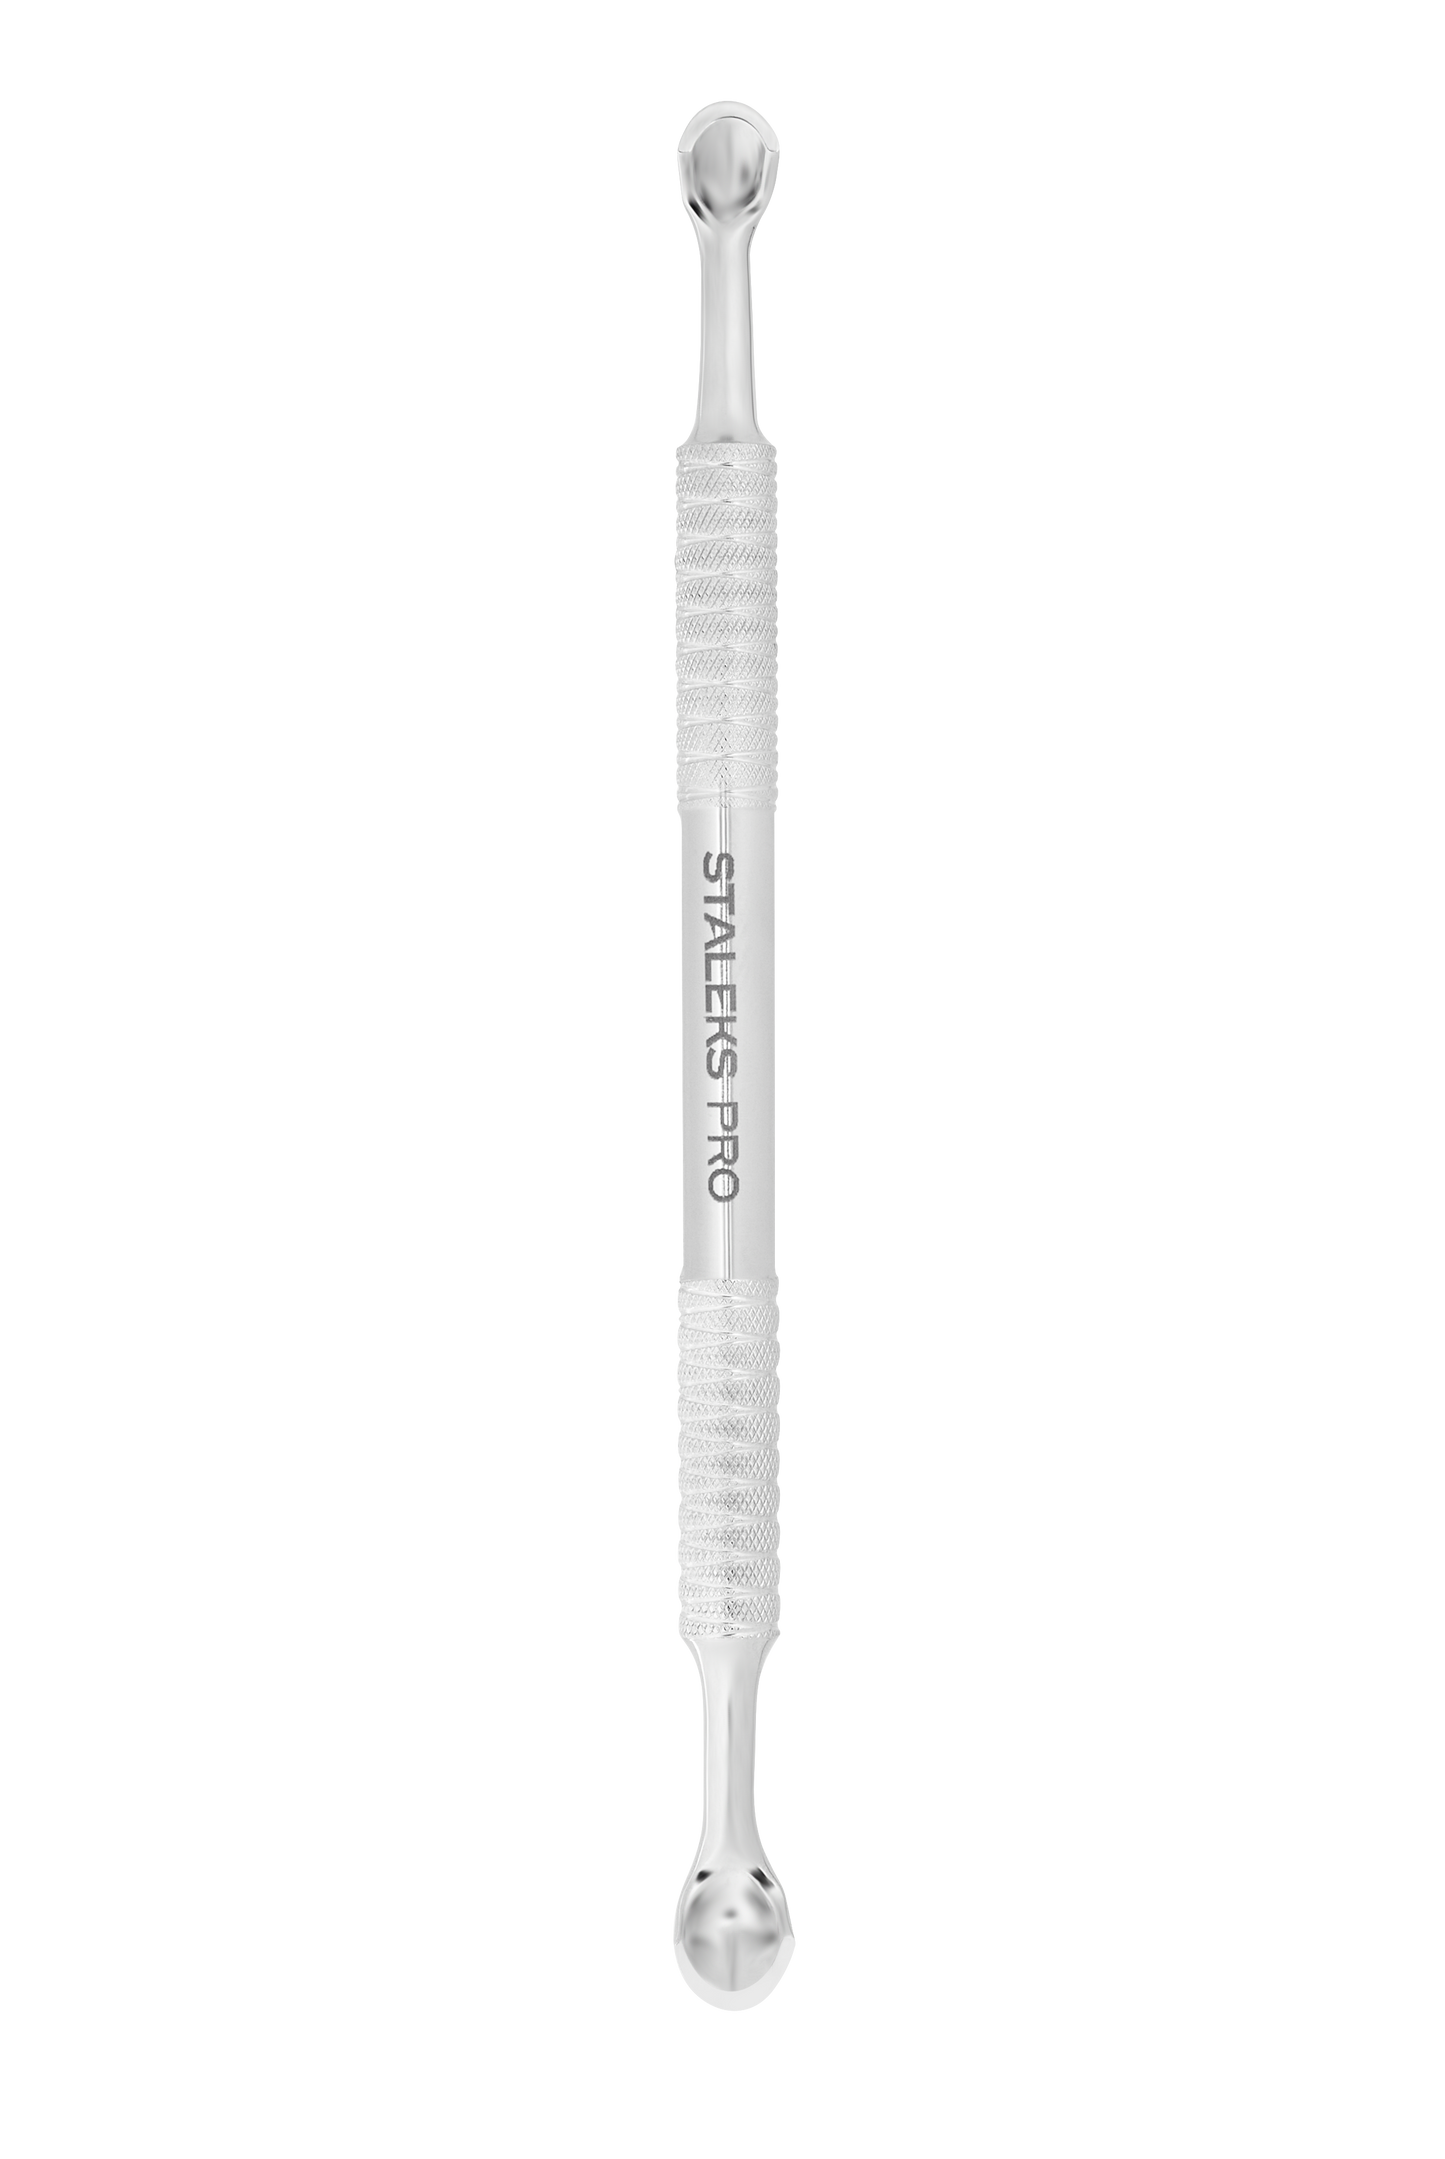 STALEKS PRO EXPERT PE-52/1 CUTICLE PUSHER (Rounded Curved Pusher Slim & Broad)